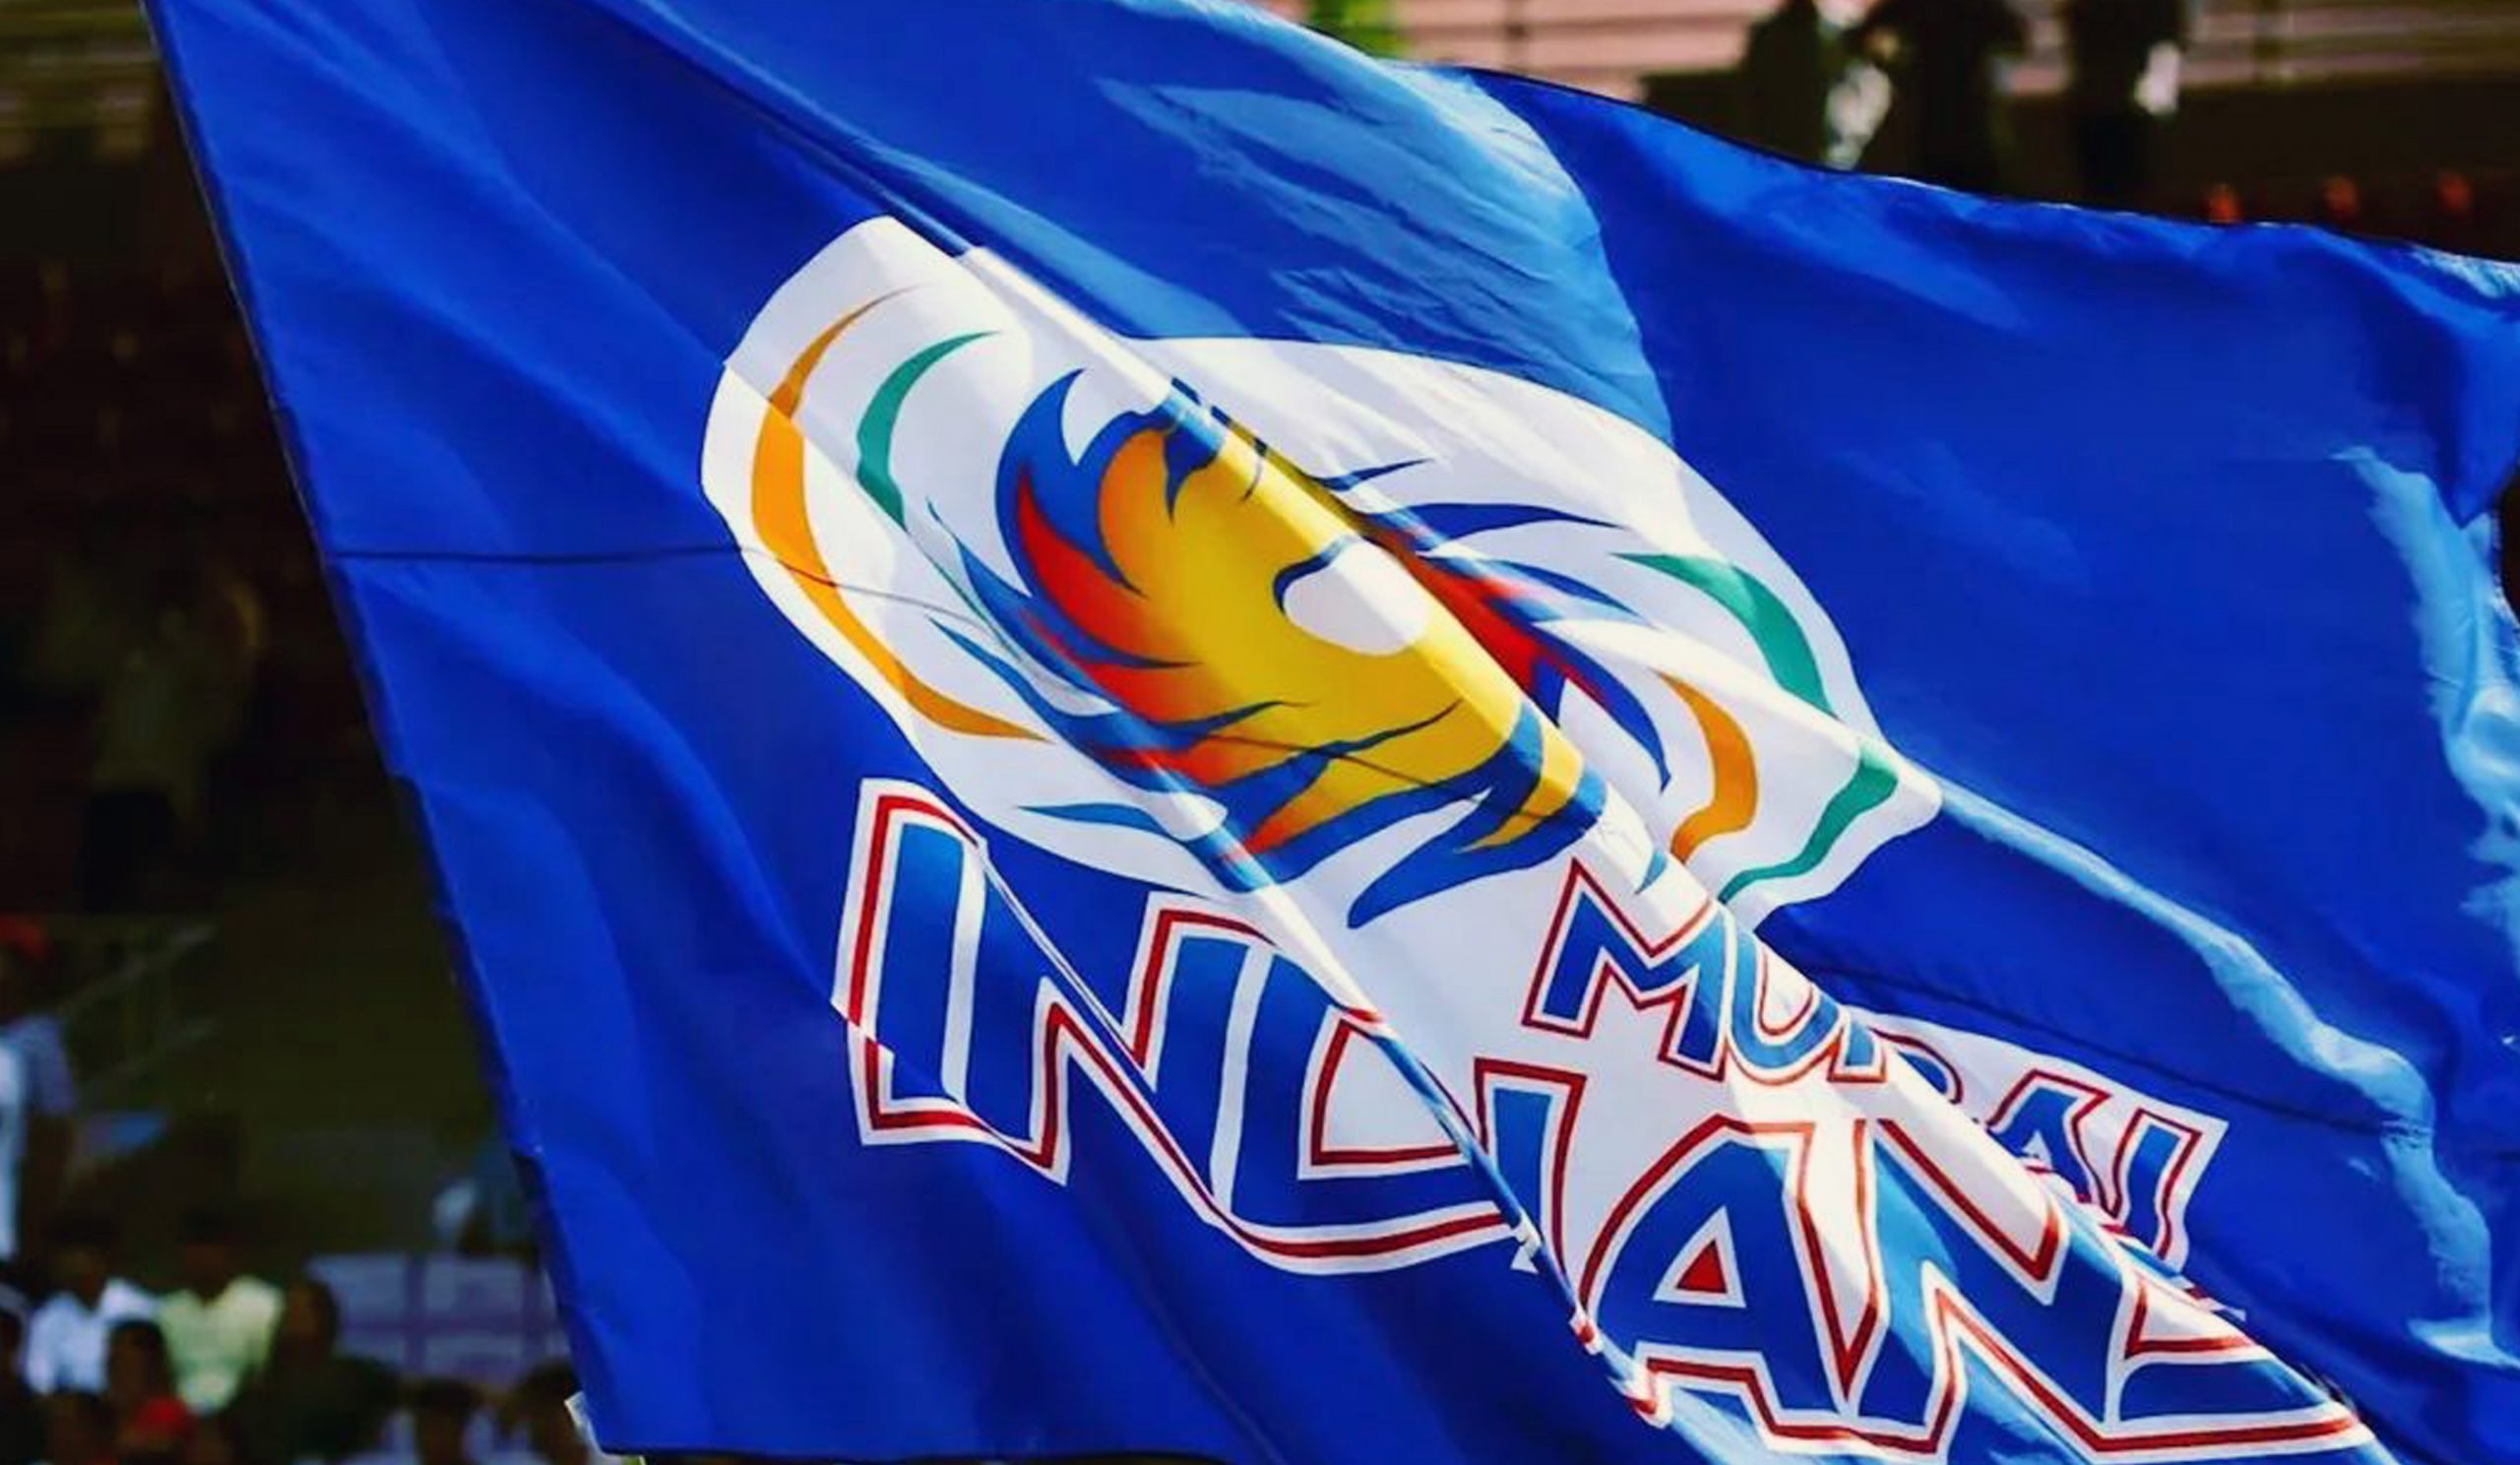 Fans waving the vibrant Mumbai Indians flag at a packed stadium, showcasing their unwavering support for their beloved IPL team